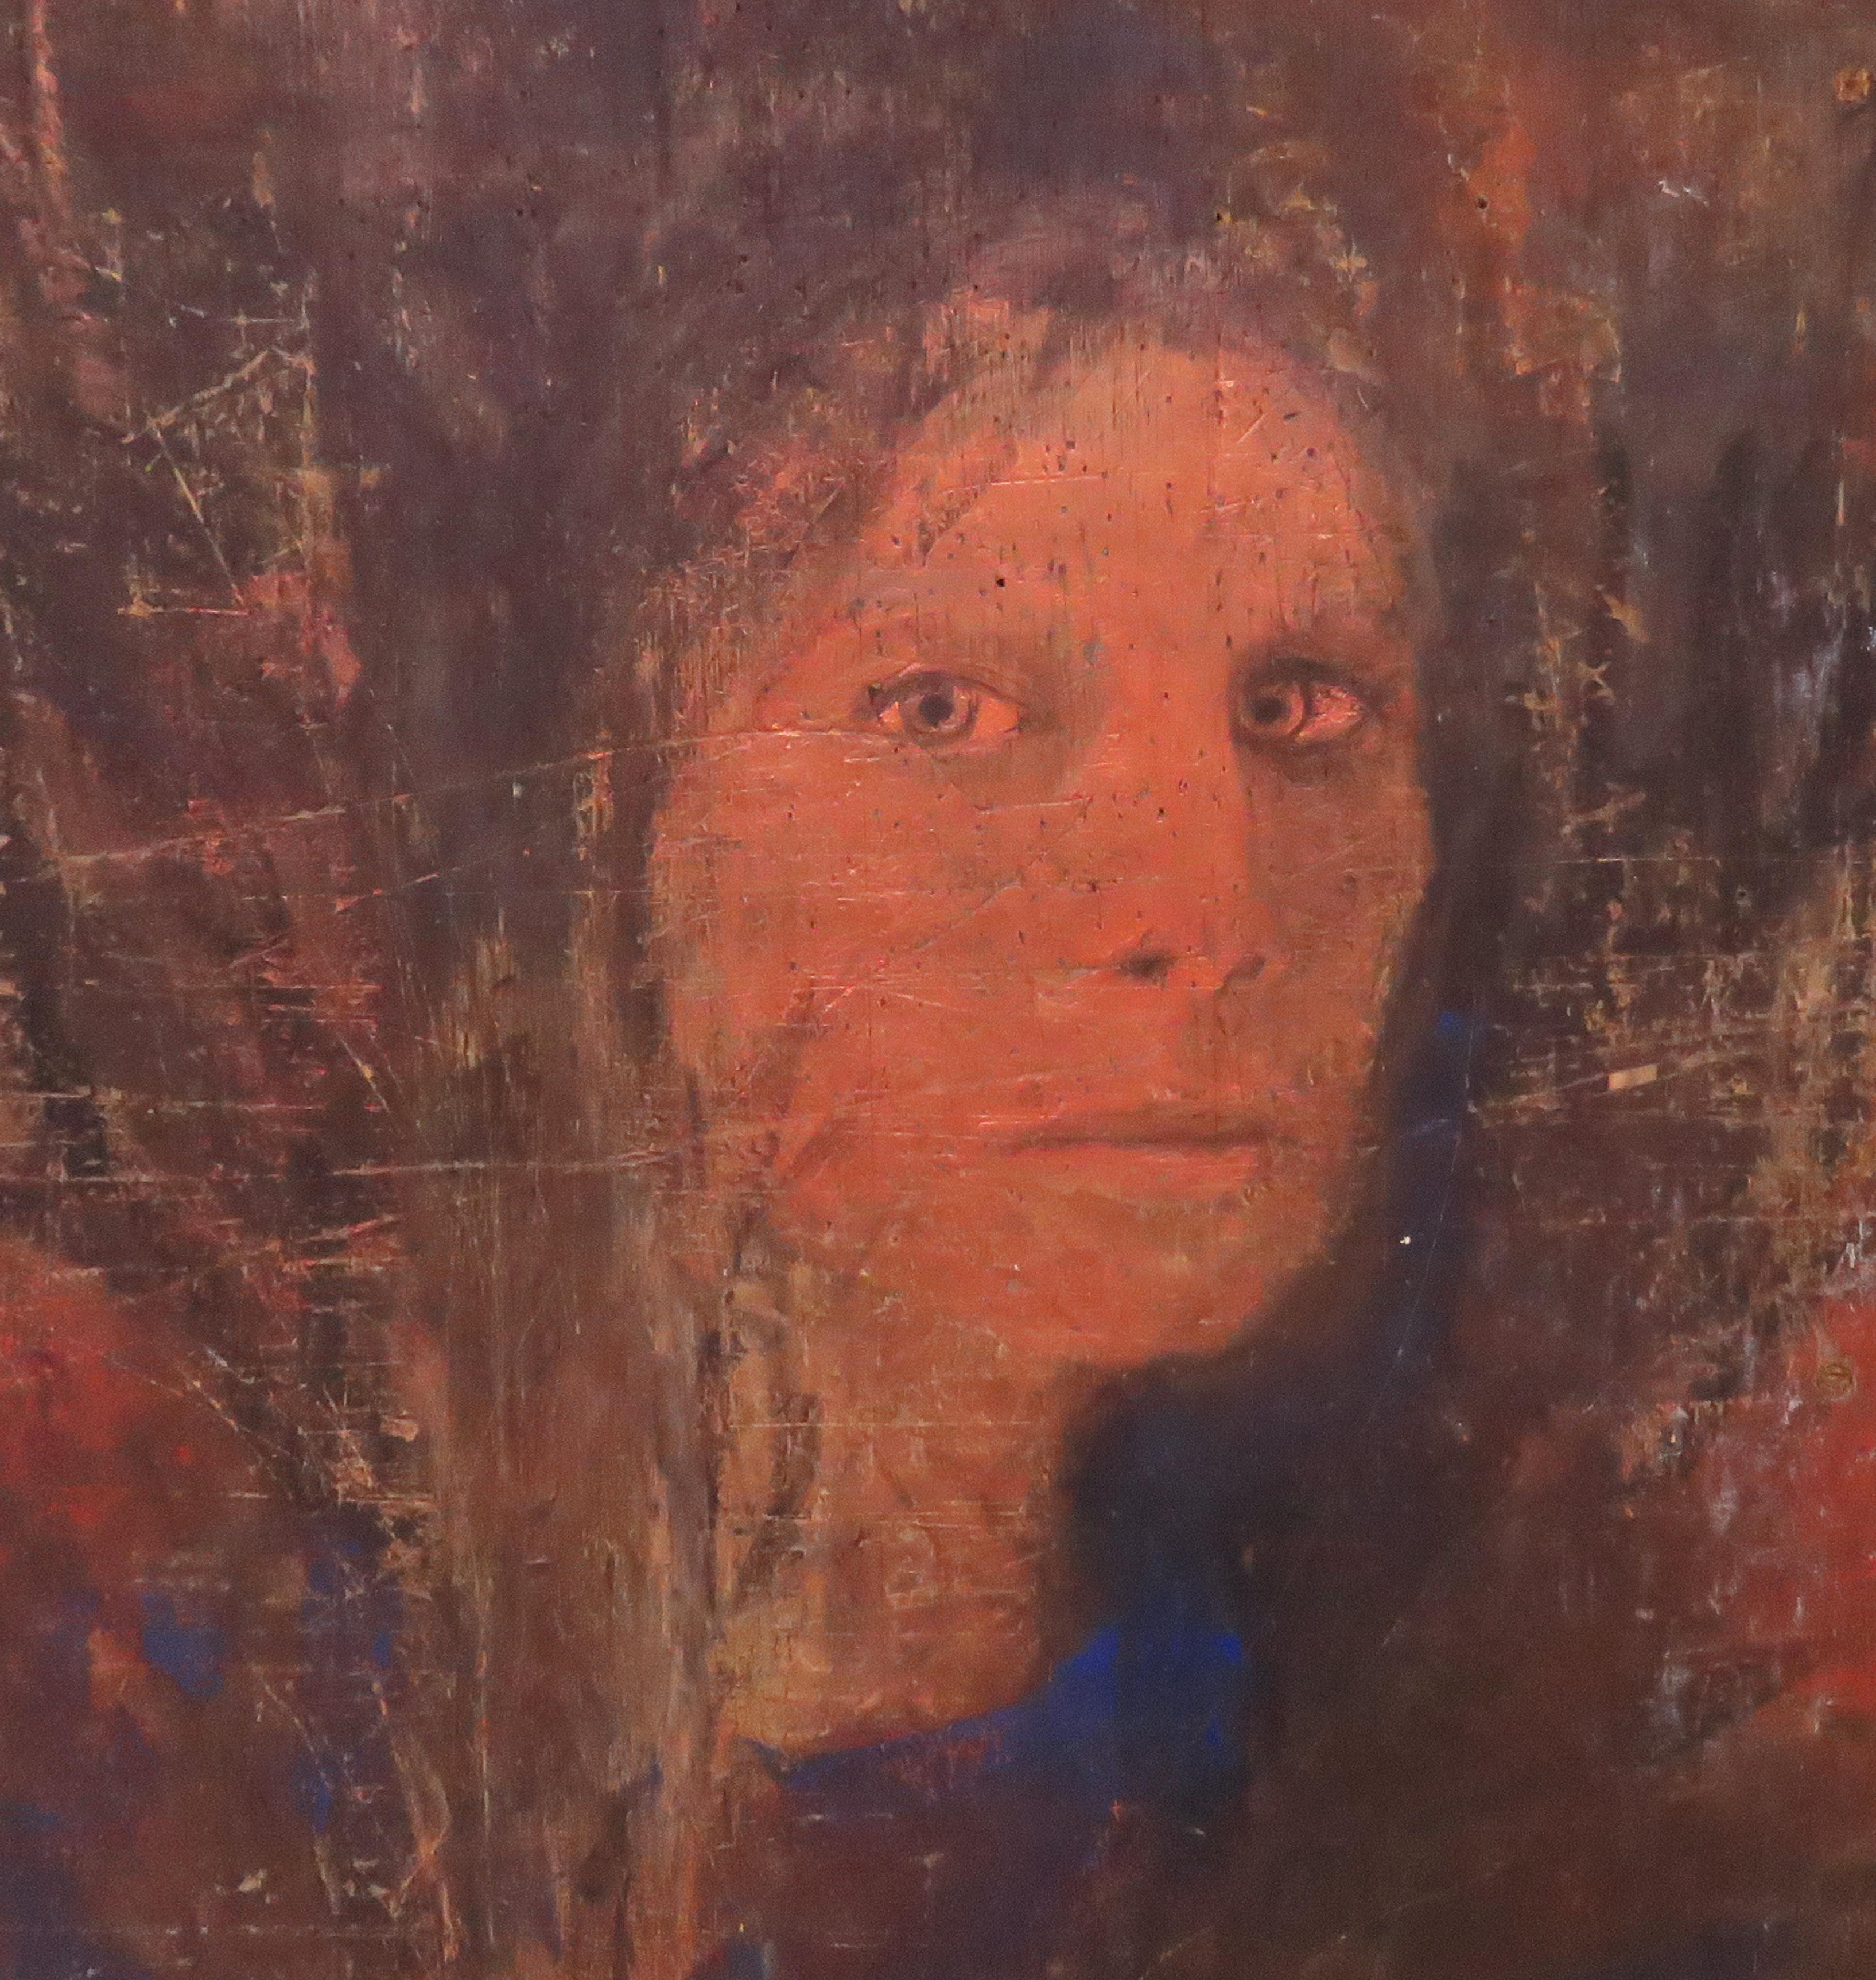 A seraphic portrait painting of a woman, who seems to us mysteriously reminiscent of Andrew Wyeth’s muse Helga, circa 1960s. Oil on a plywood panel previously used as a drawing board, with distressing from numerous tack holes and paper cuttings.